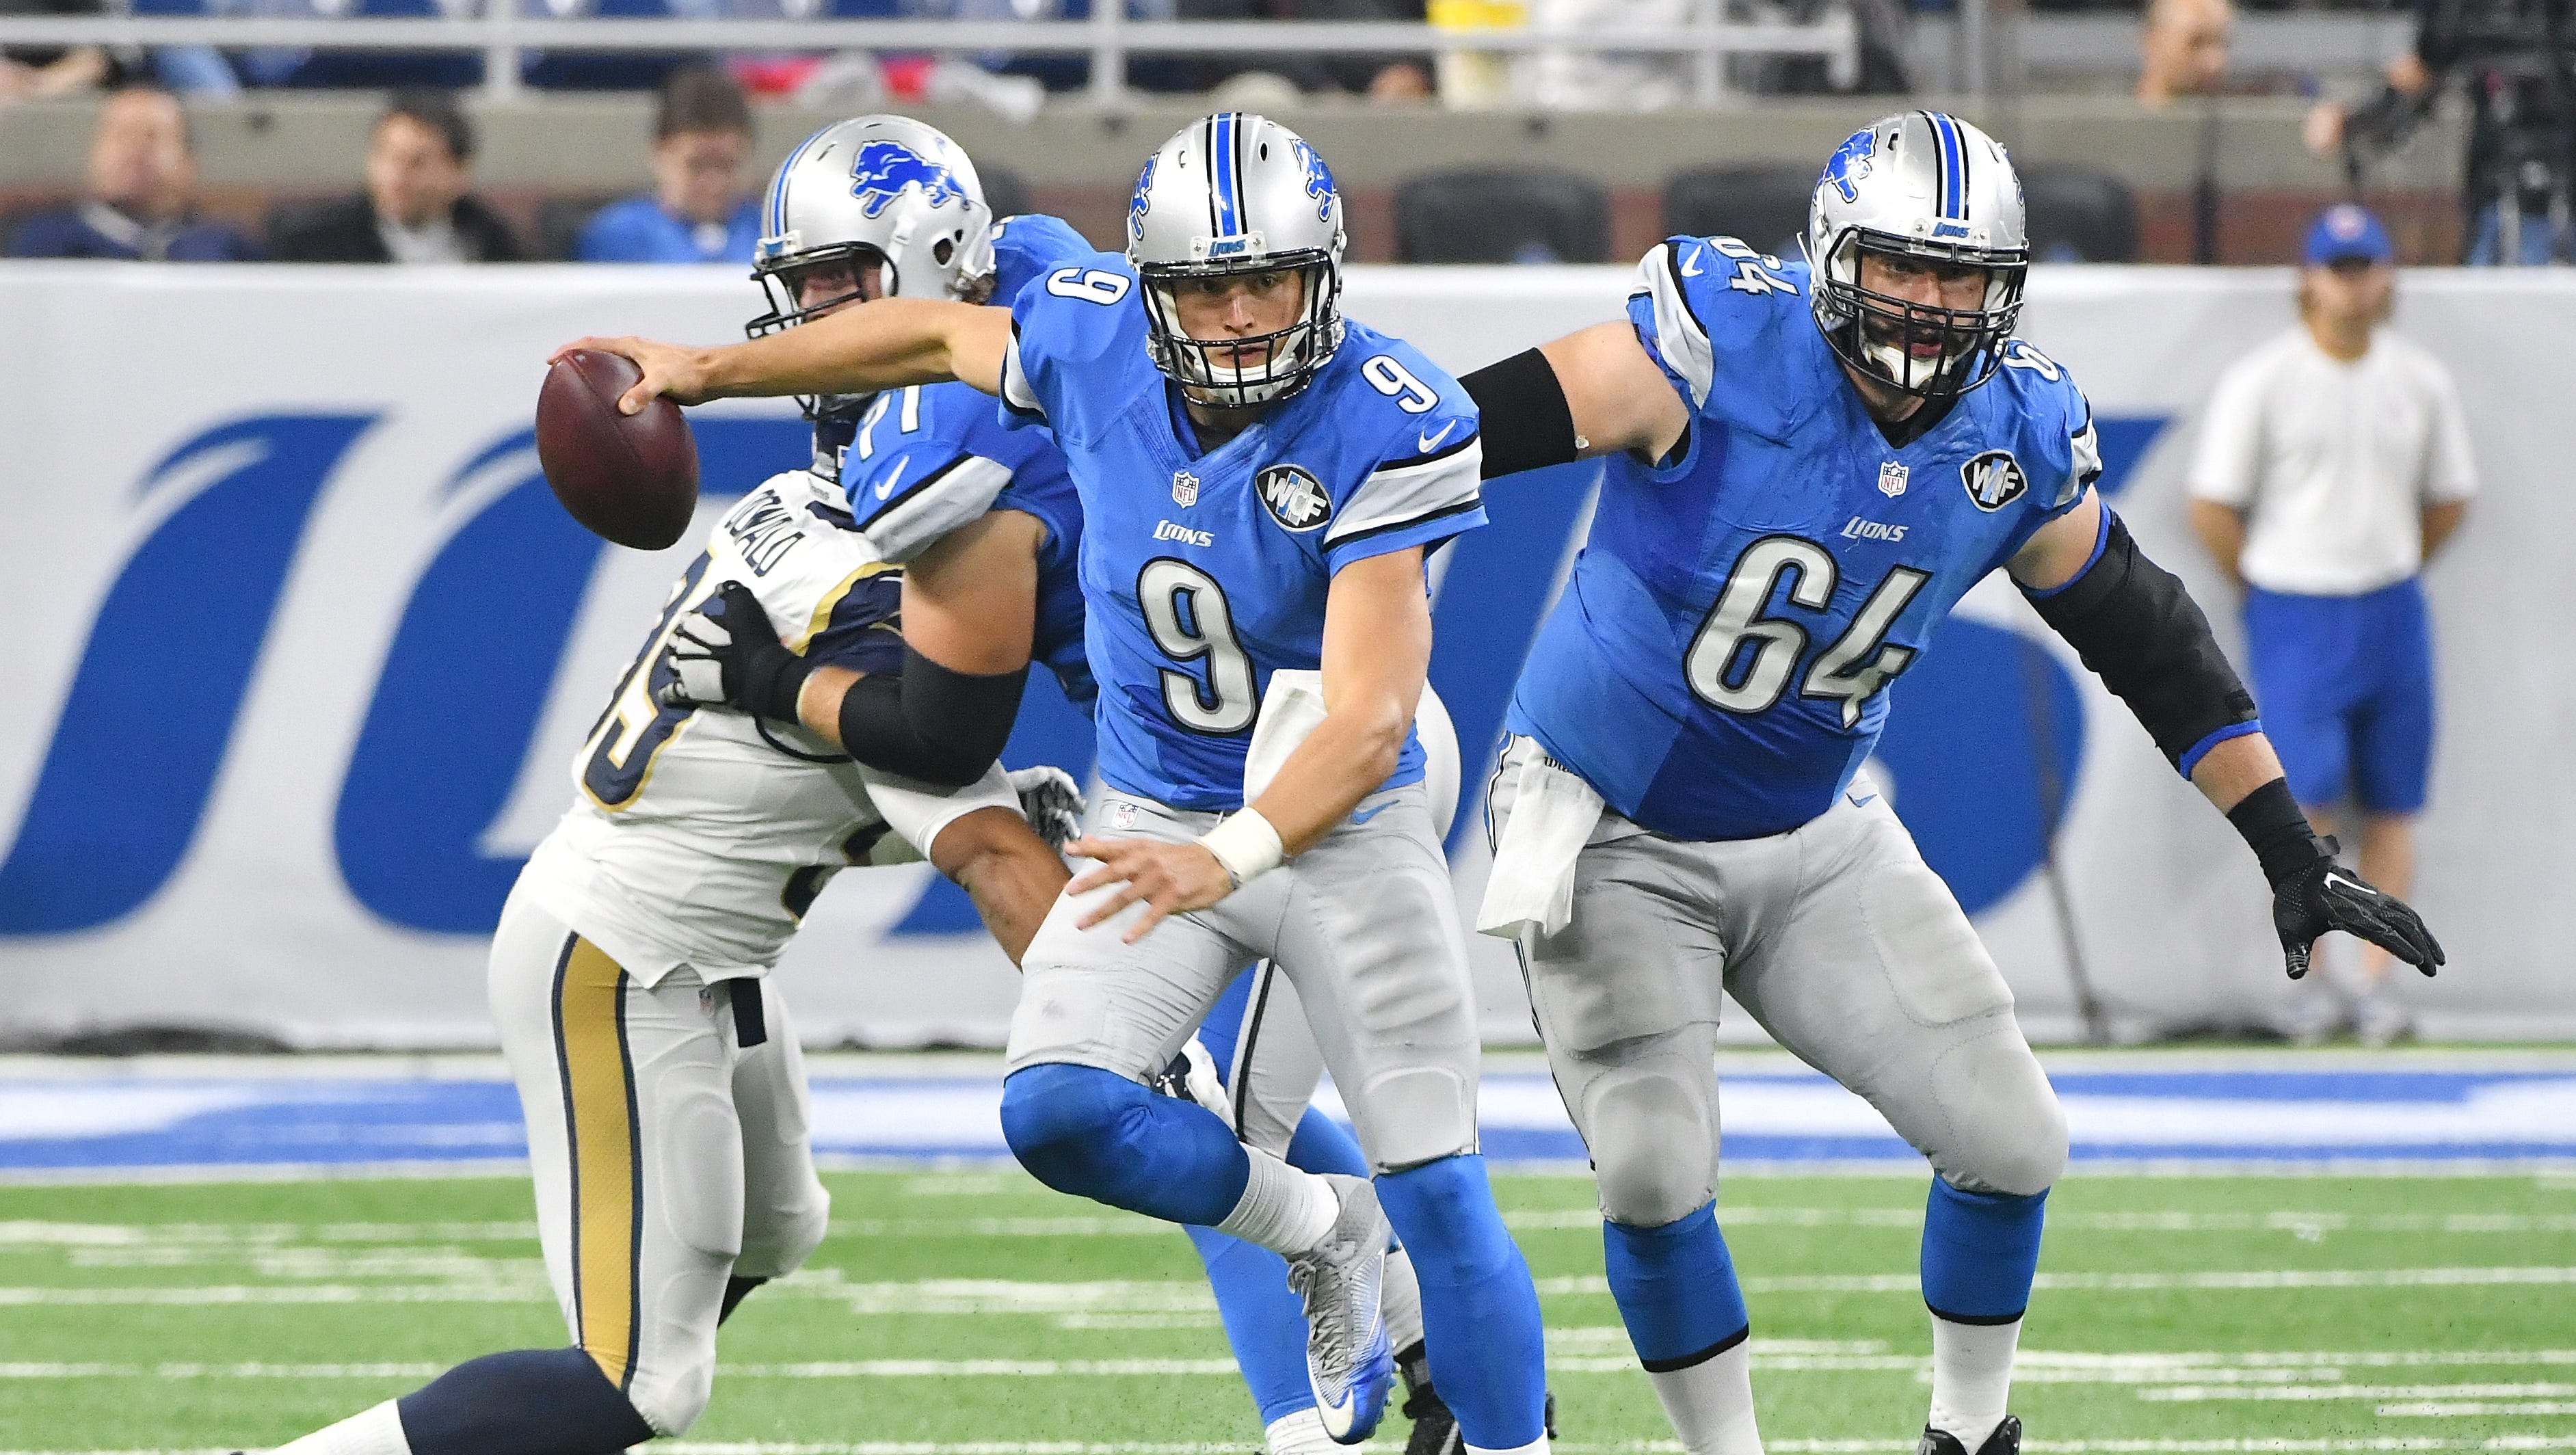 Lions quarterback Matthew Stafford scrambles out of the pocket and down the field on a run in the third quarter.